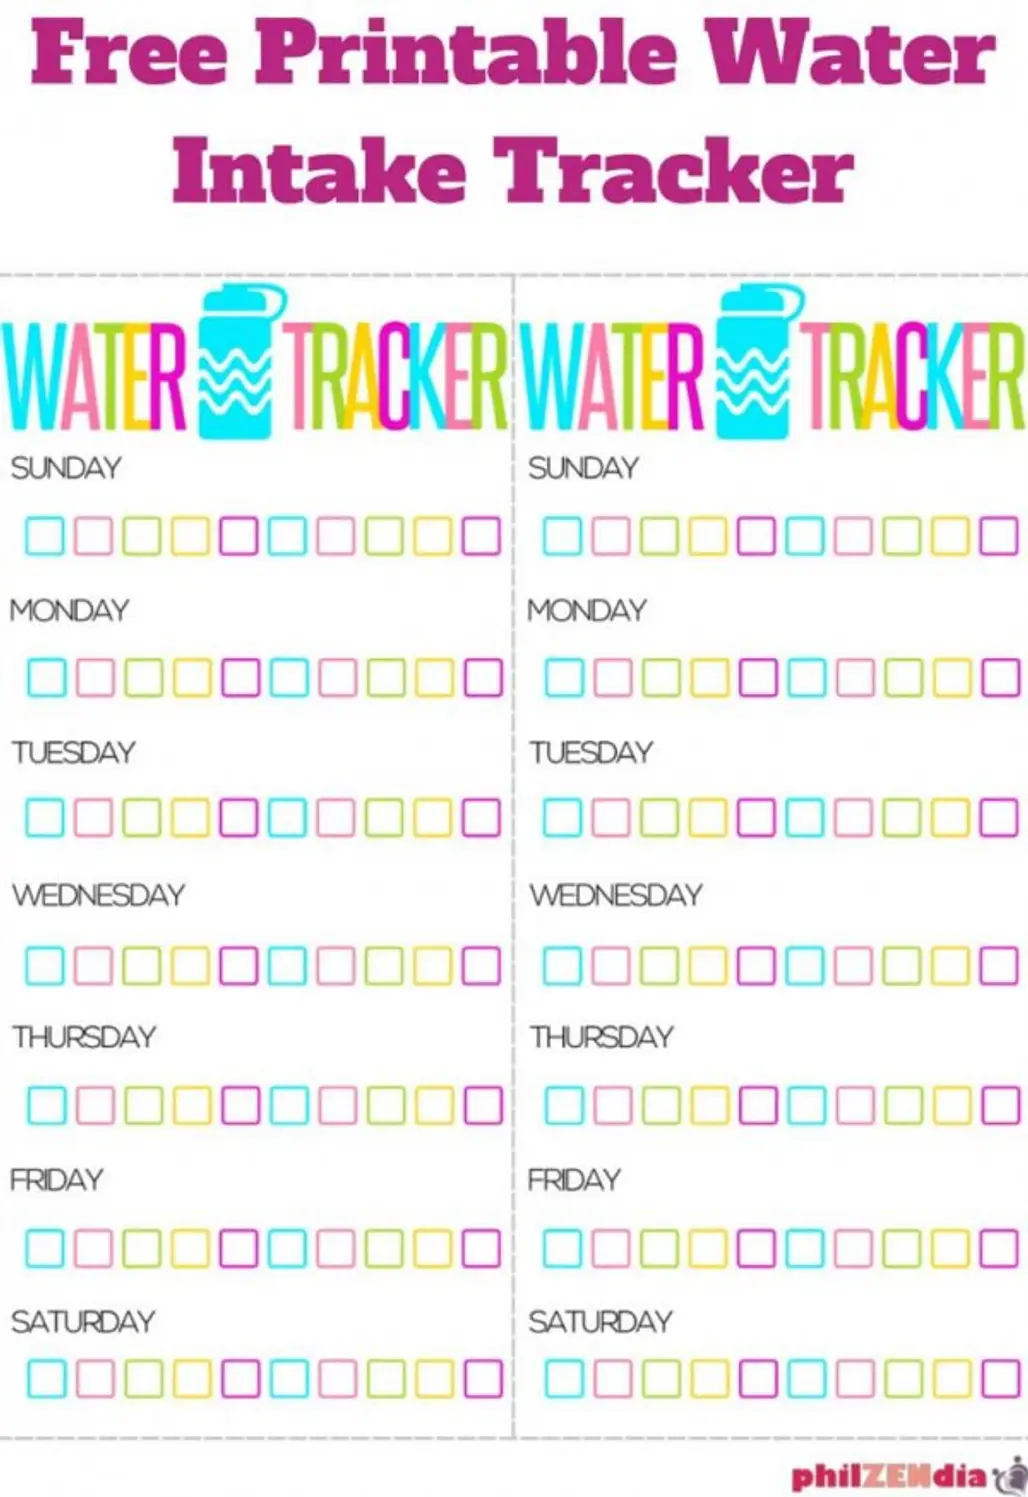 Track Your Water Intake